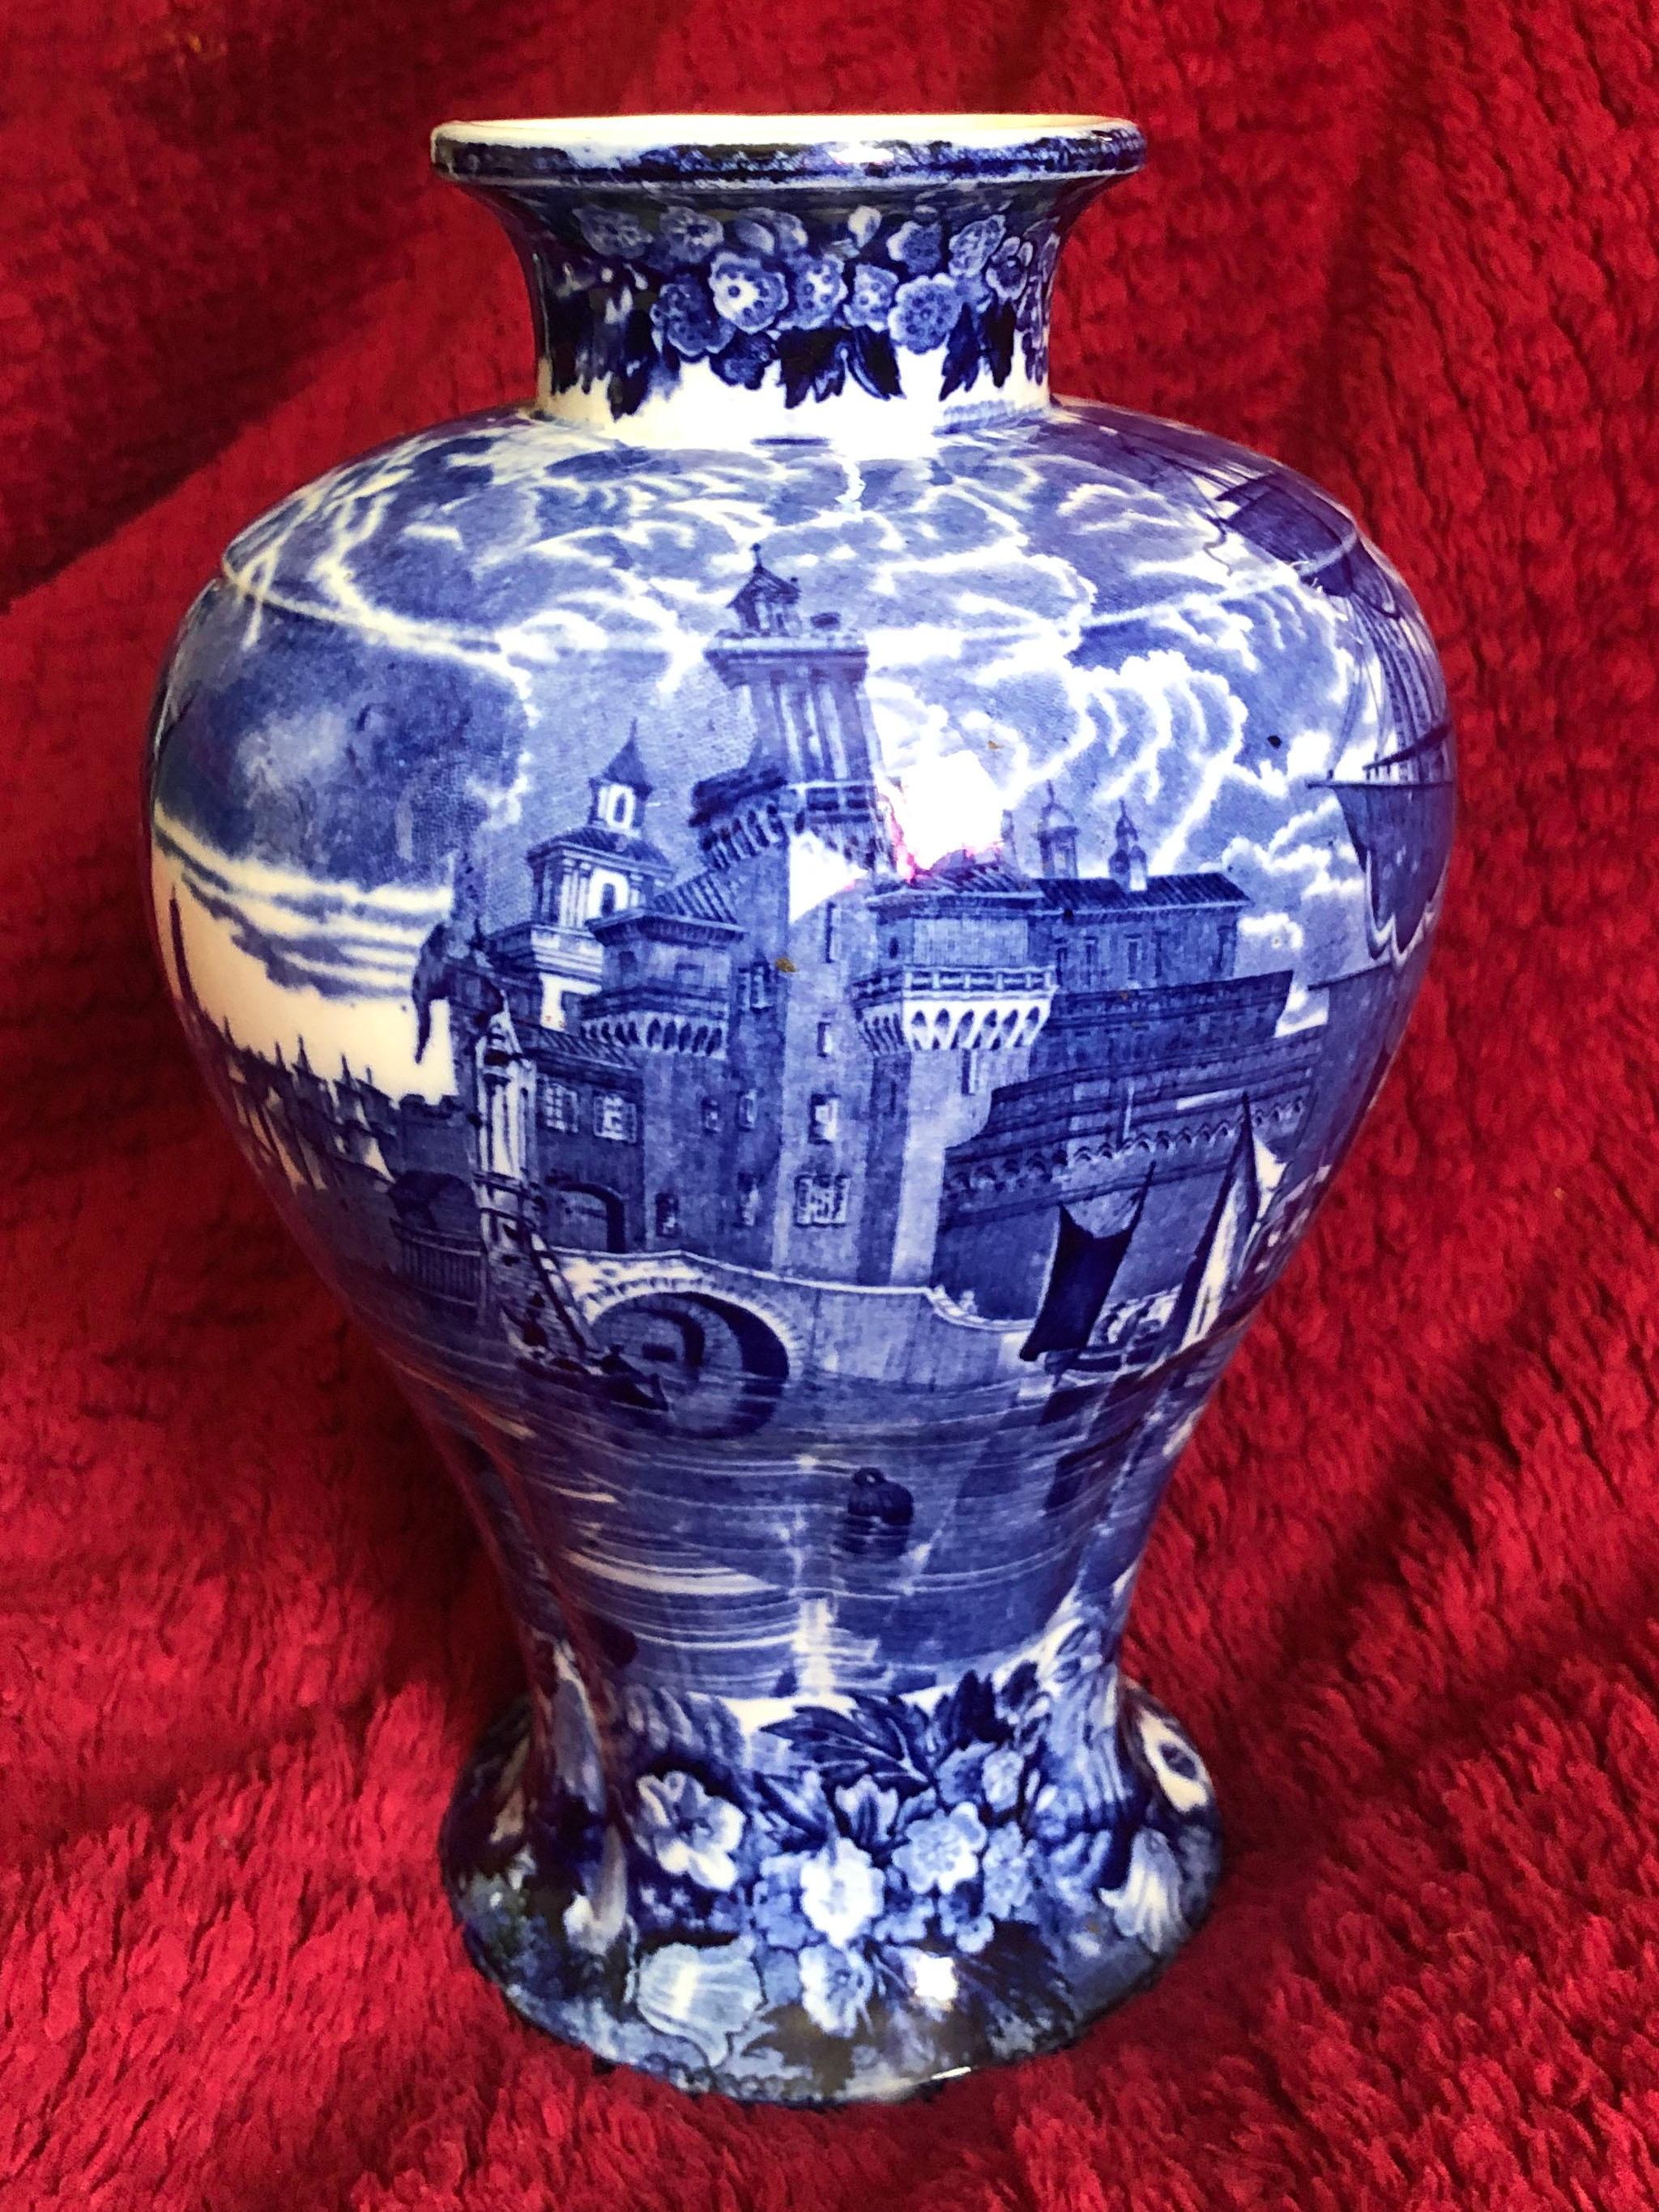 A fine Wedgwood Etruria lidded blue and white lidded vase in baluster form with a short neck. It is the famous sought after Ferrara pattern and depicts lively scenes of people sailing on a canal, ships and beautiful ancient buildings. A floral